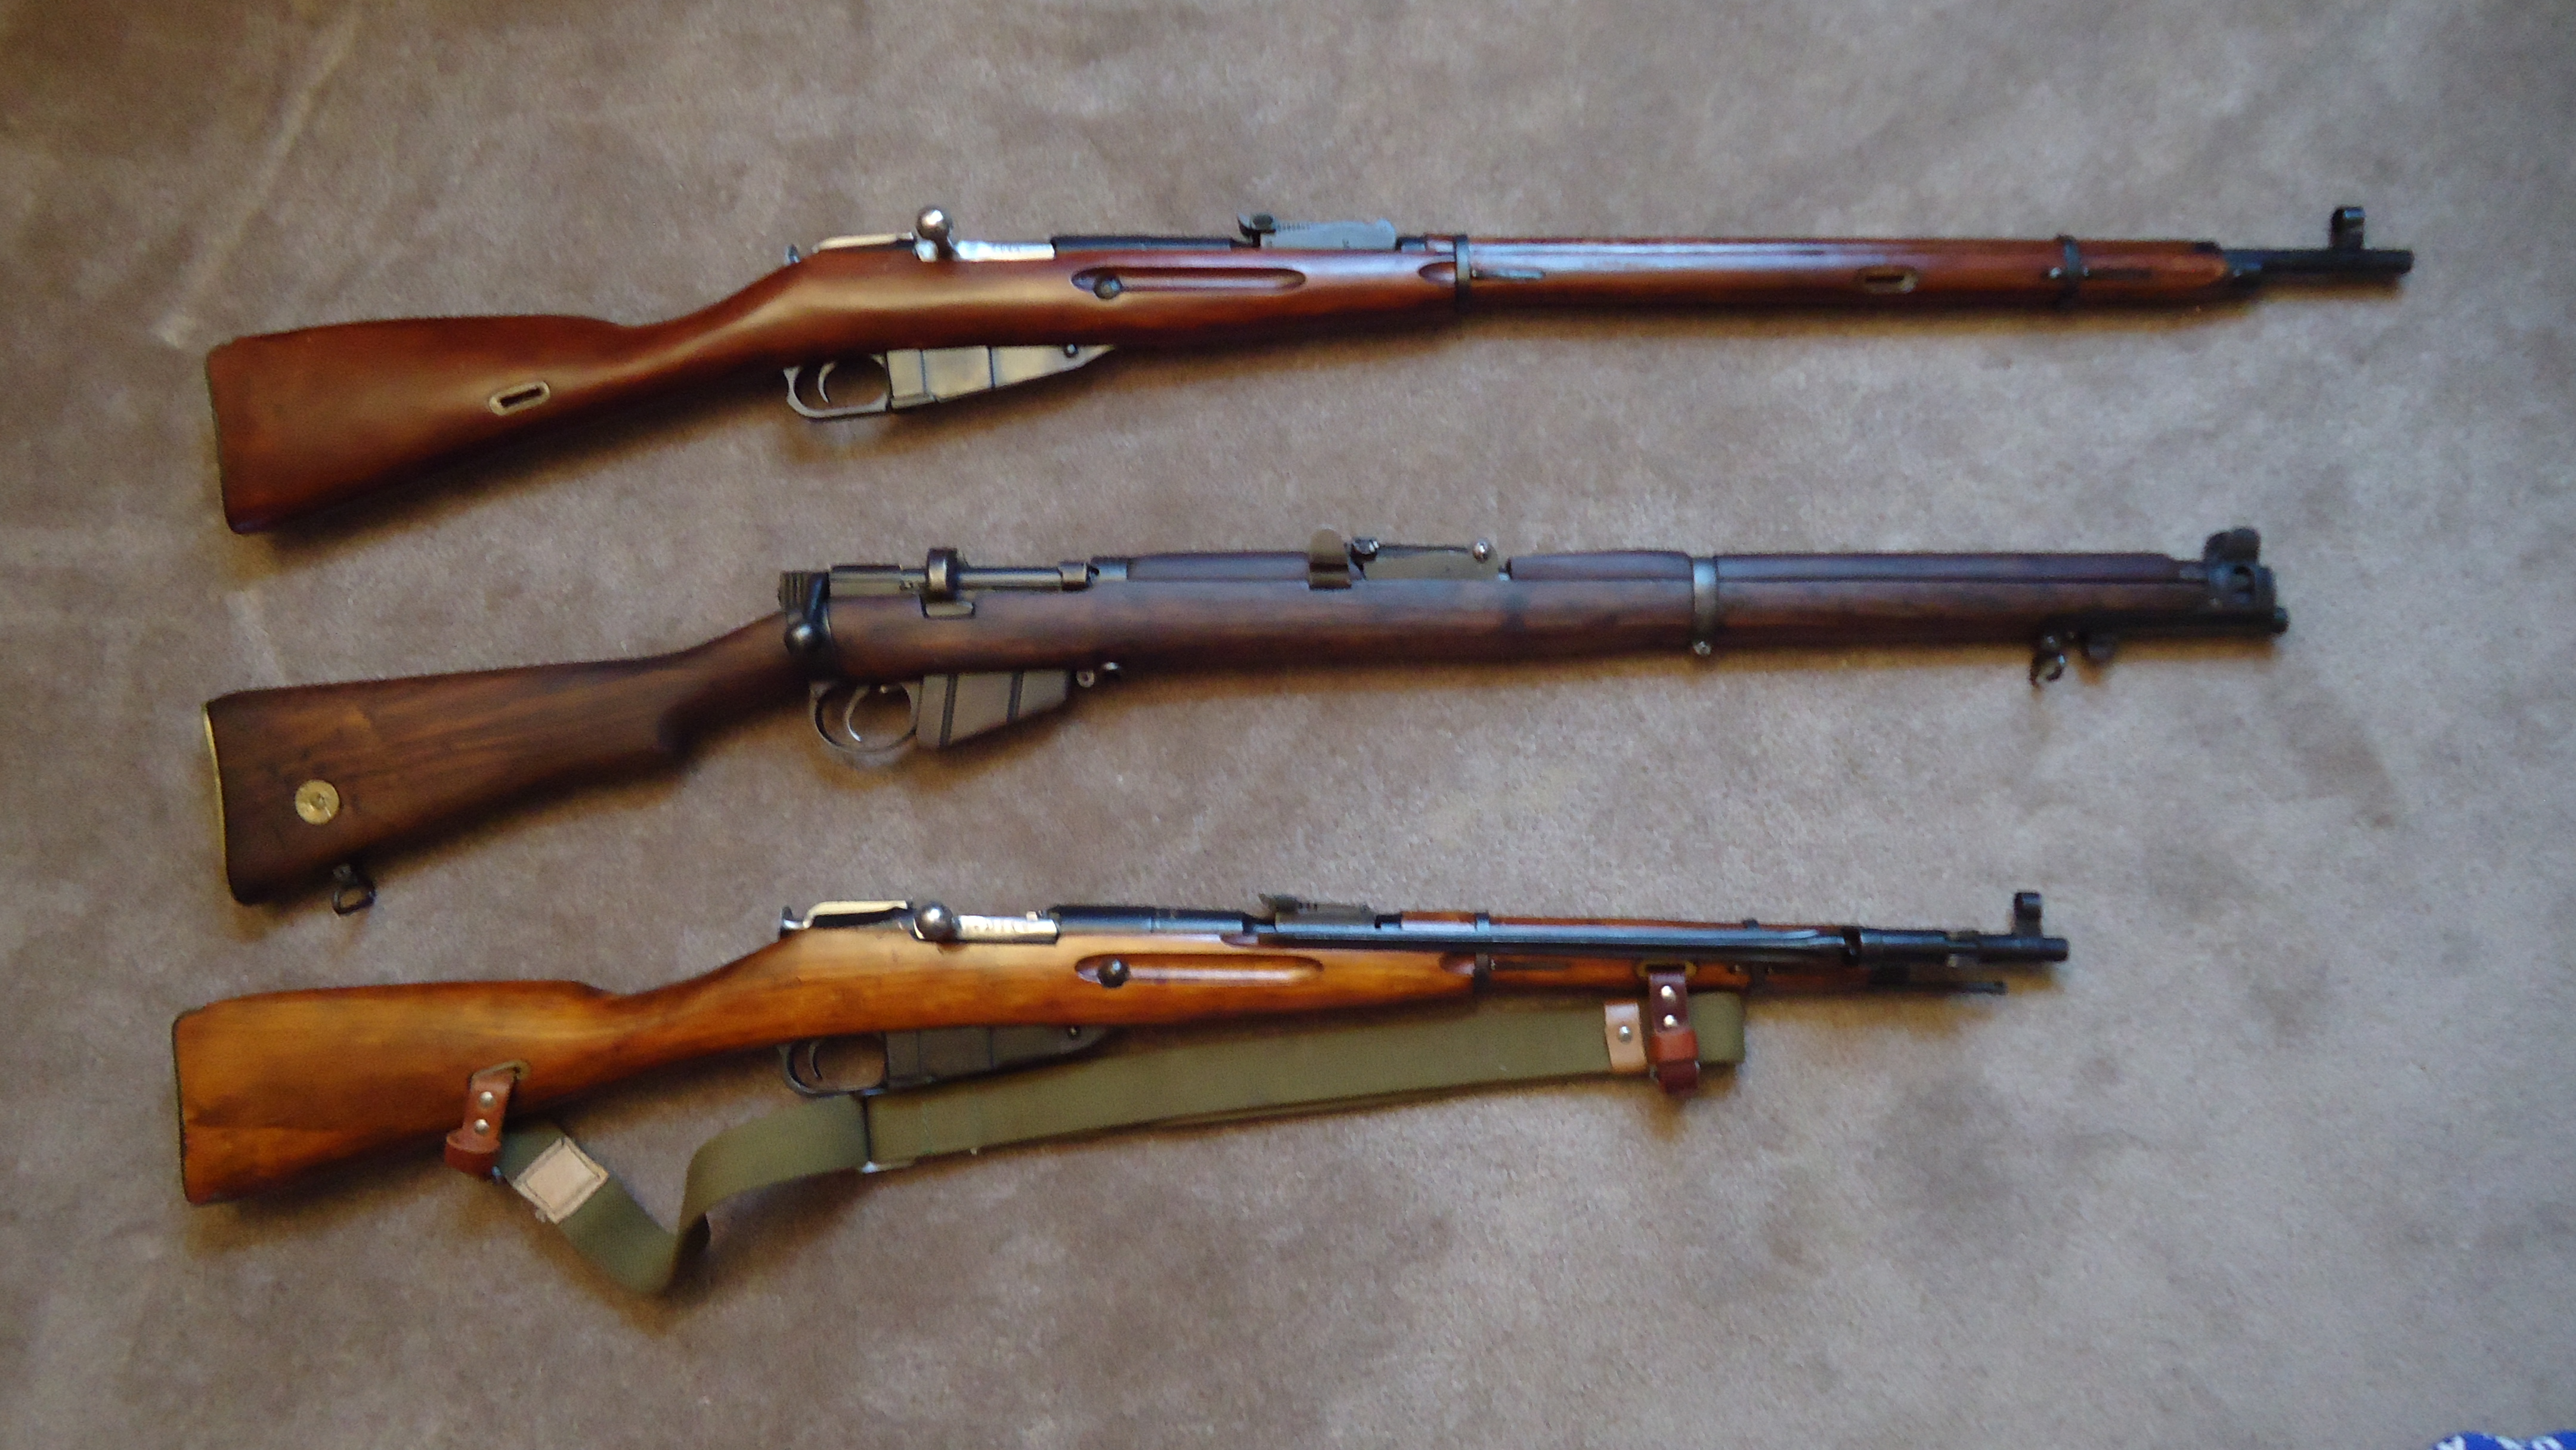 Amazing Enfield 303 British Rifle Pictures & Backgrounds